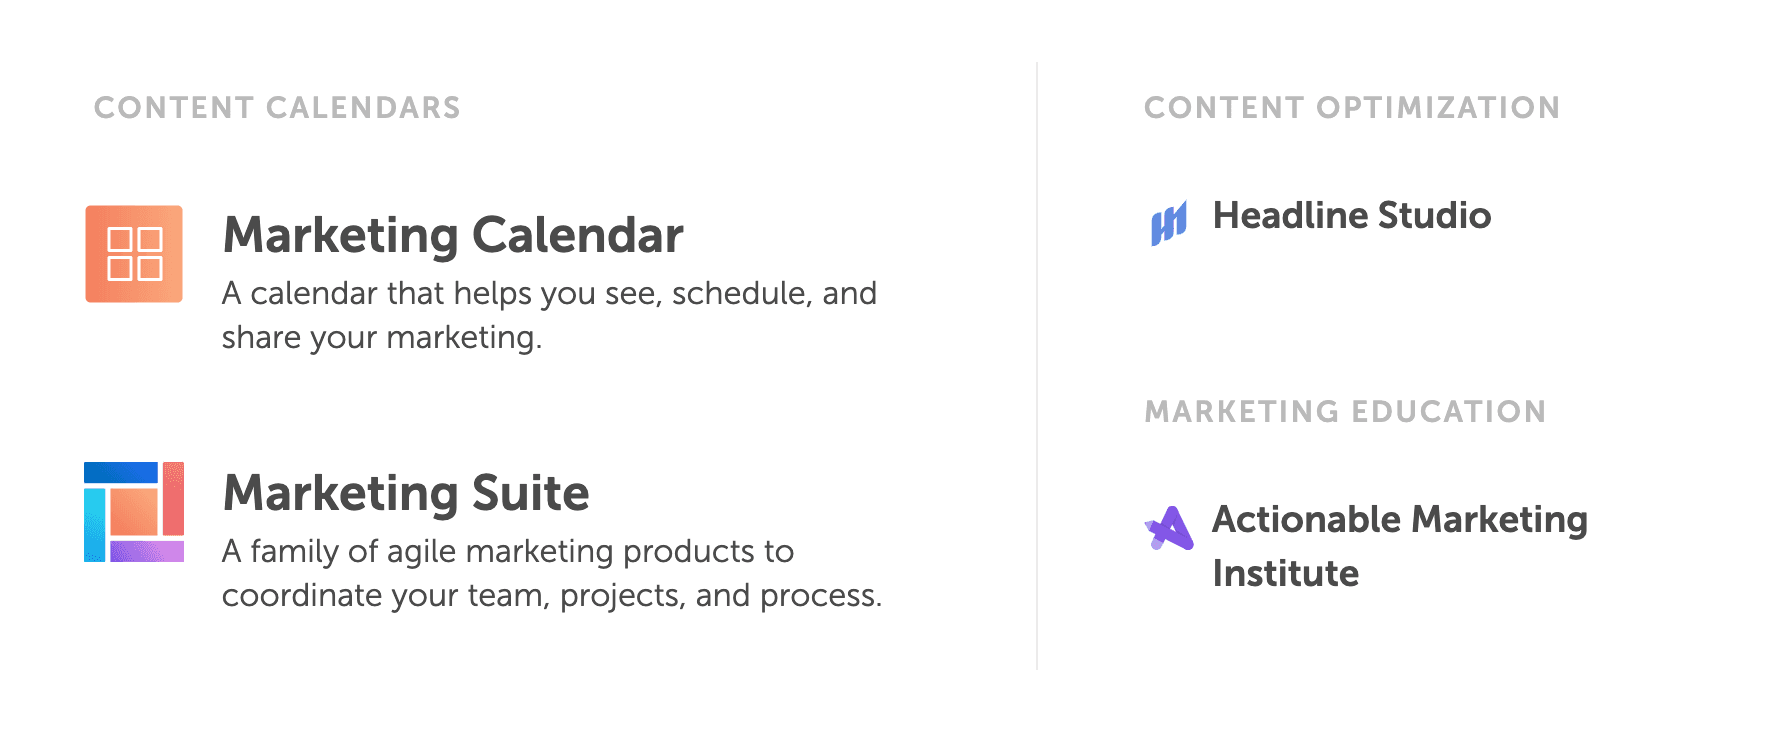 CoSchedule product & service pages